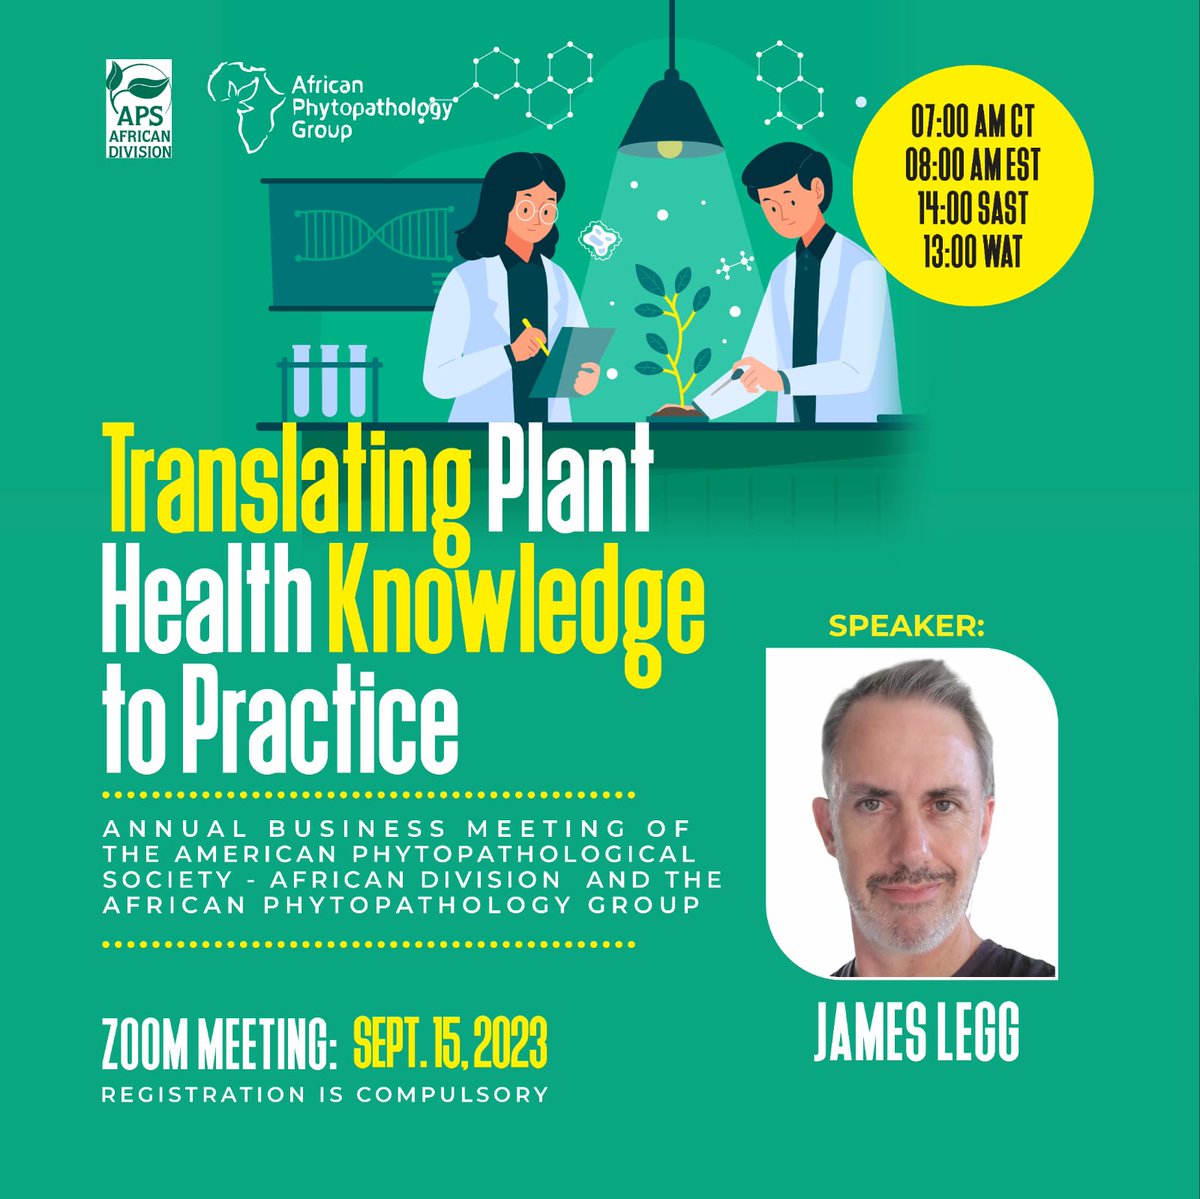 We are 5 DAYS away to our annual division meeting. We can't wait to share from the wealth of experience of our speaker @jamesplegg of @IITA_CGIAR. Registration is still possible and it's FREE for all. Register here 👇apsnet.org/members/commun…